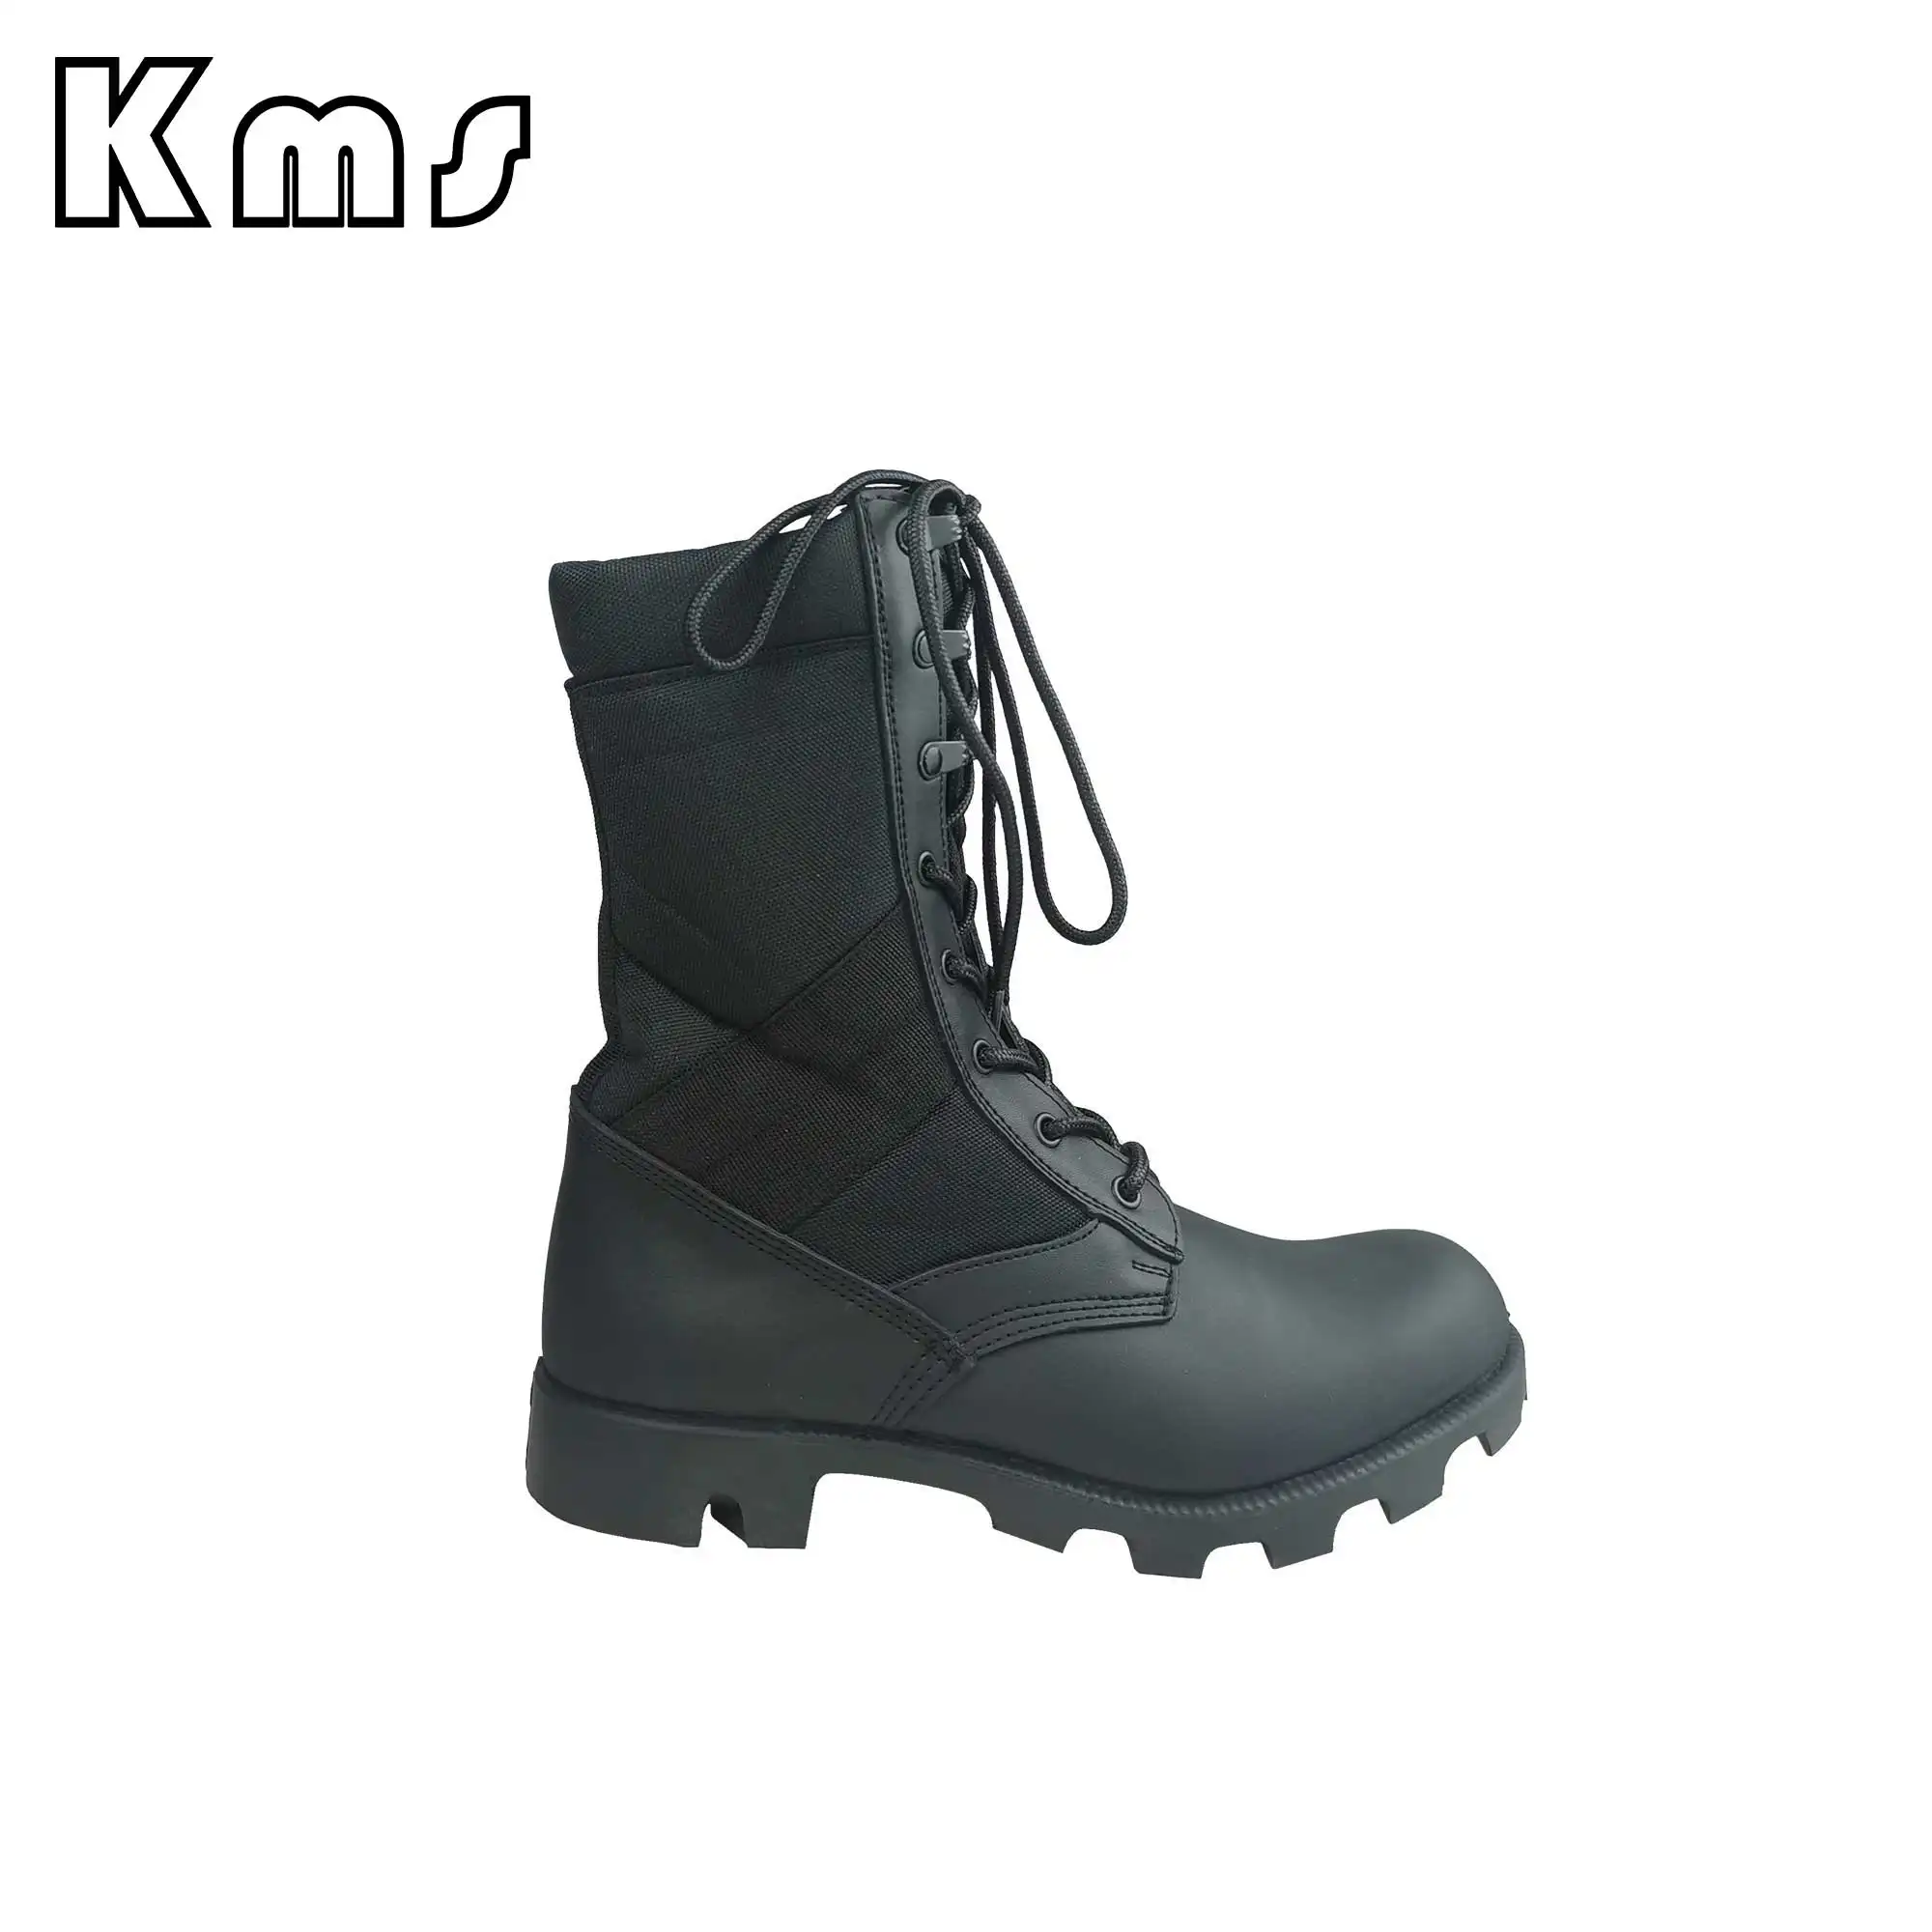 KMS Wholesale Customized Original Waterproof Shoes High Ankle Tactical Black lightweight tactical Boots For Men